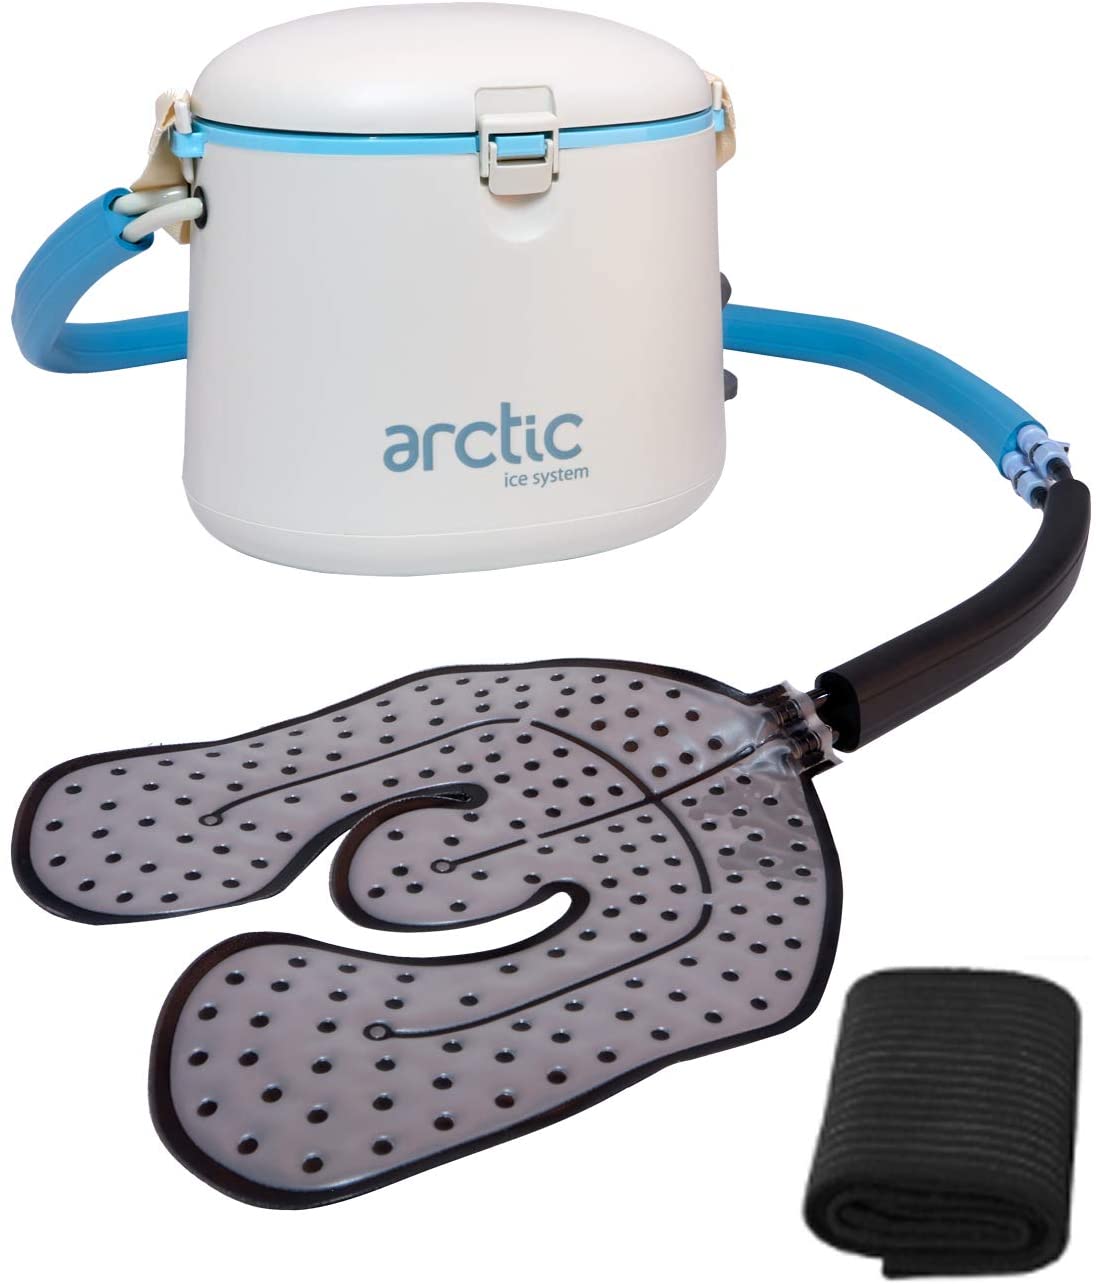 Hot & Cold Therapy Products, Supplies and Equipment